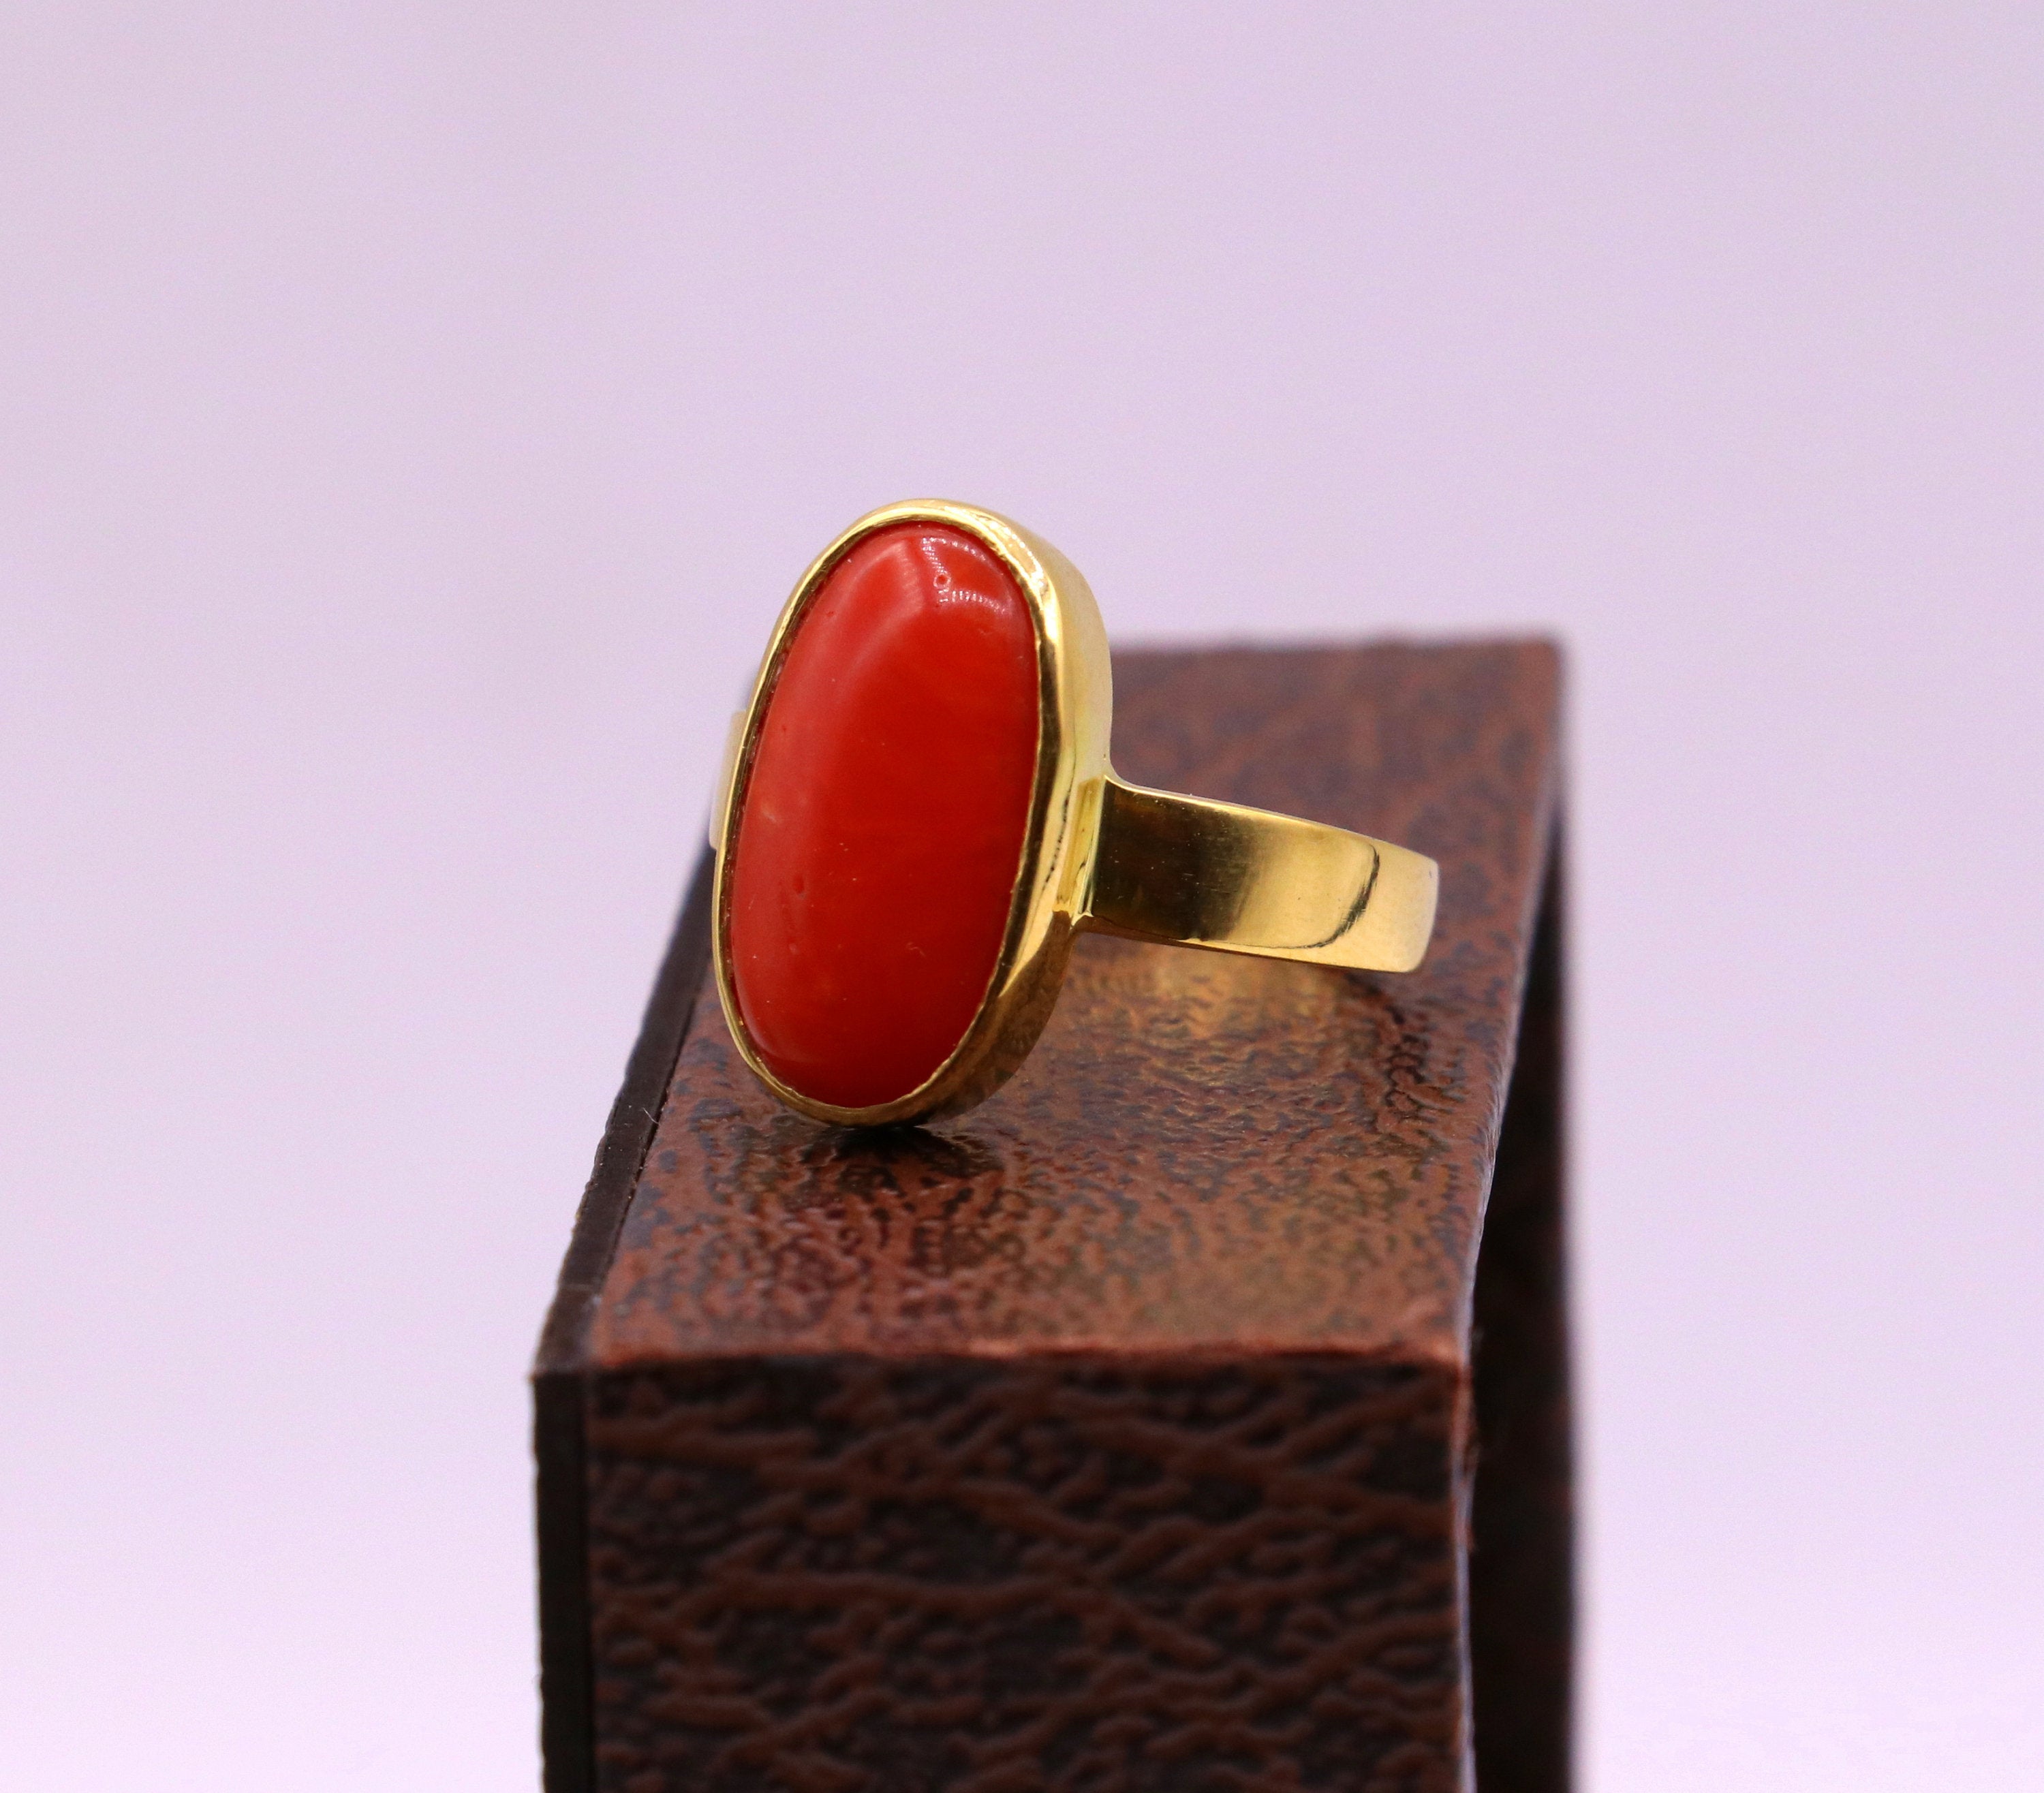 Takshila Gems Natural Red Coral Ring for Men and Women in Panchdhatu  Adjustable Ring Lab Certified Moonga Stone Ring (6.25 Ratti / 5.62 Carat) Stone  Coral Gold Plated Ring Price in India -